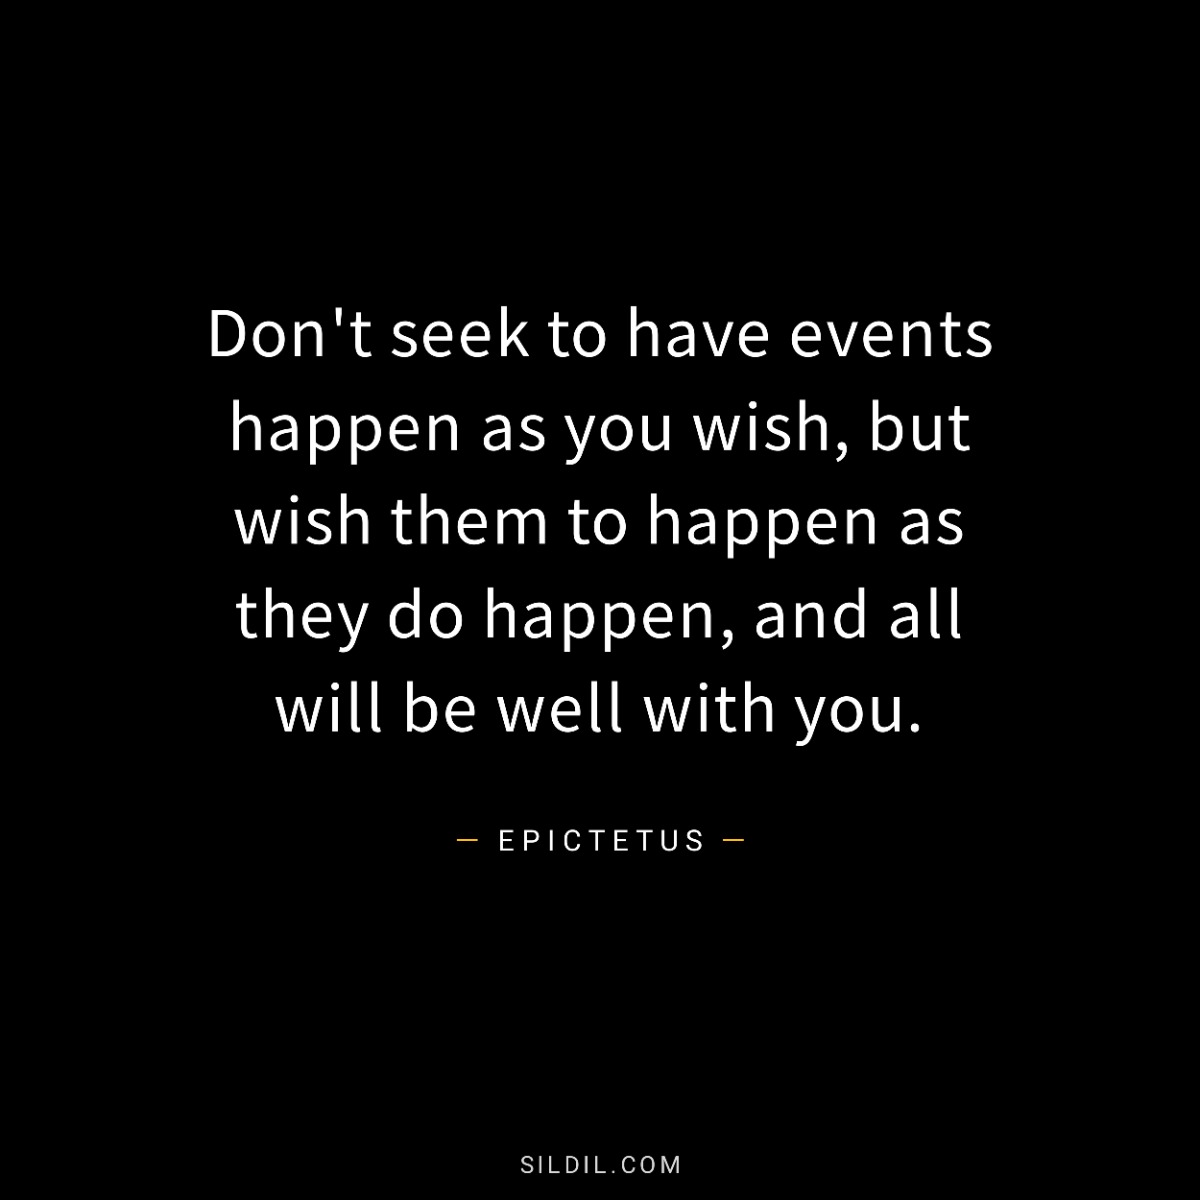 Don't seek to have events happen as you wish, but wish them to happen as they do happen, and all will be well with you.